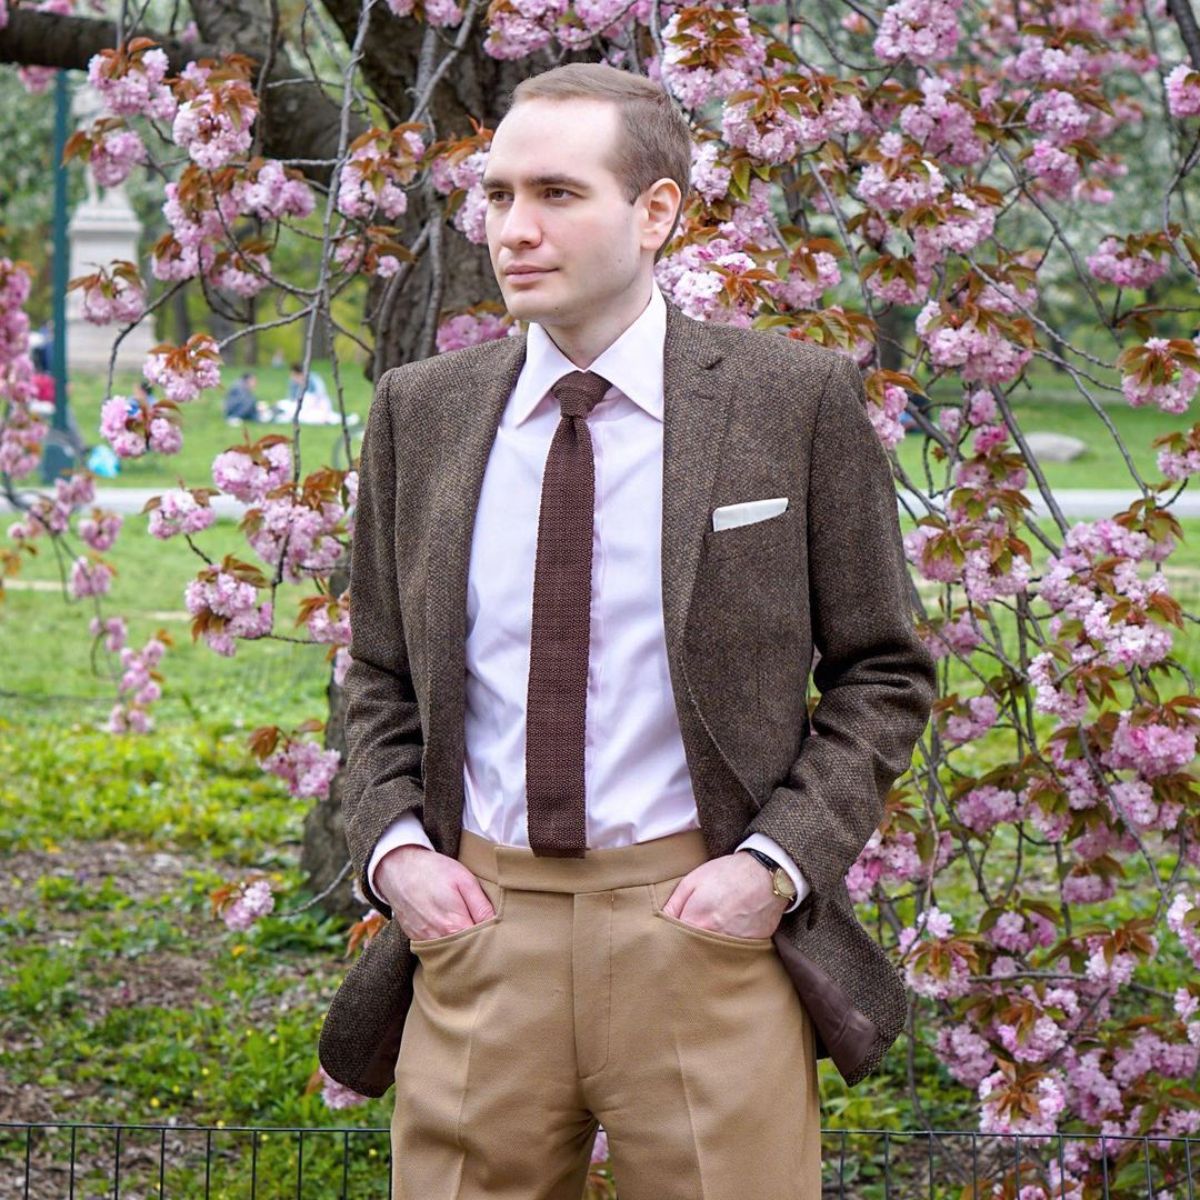 A man wears a classic brown jacket outfit.